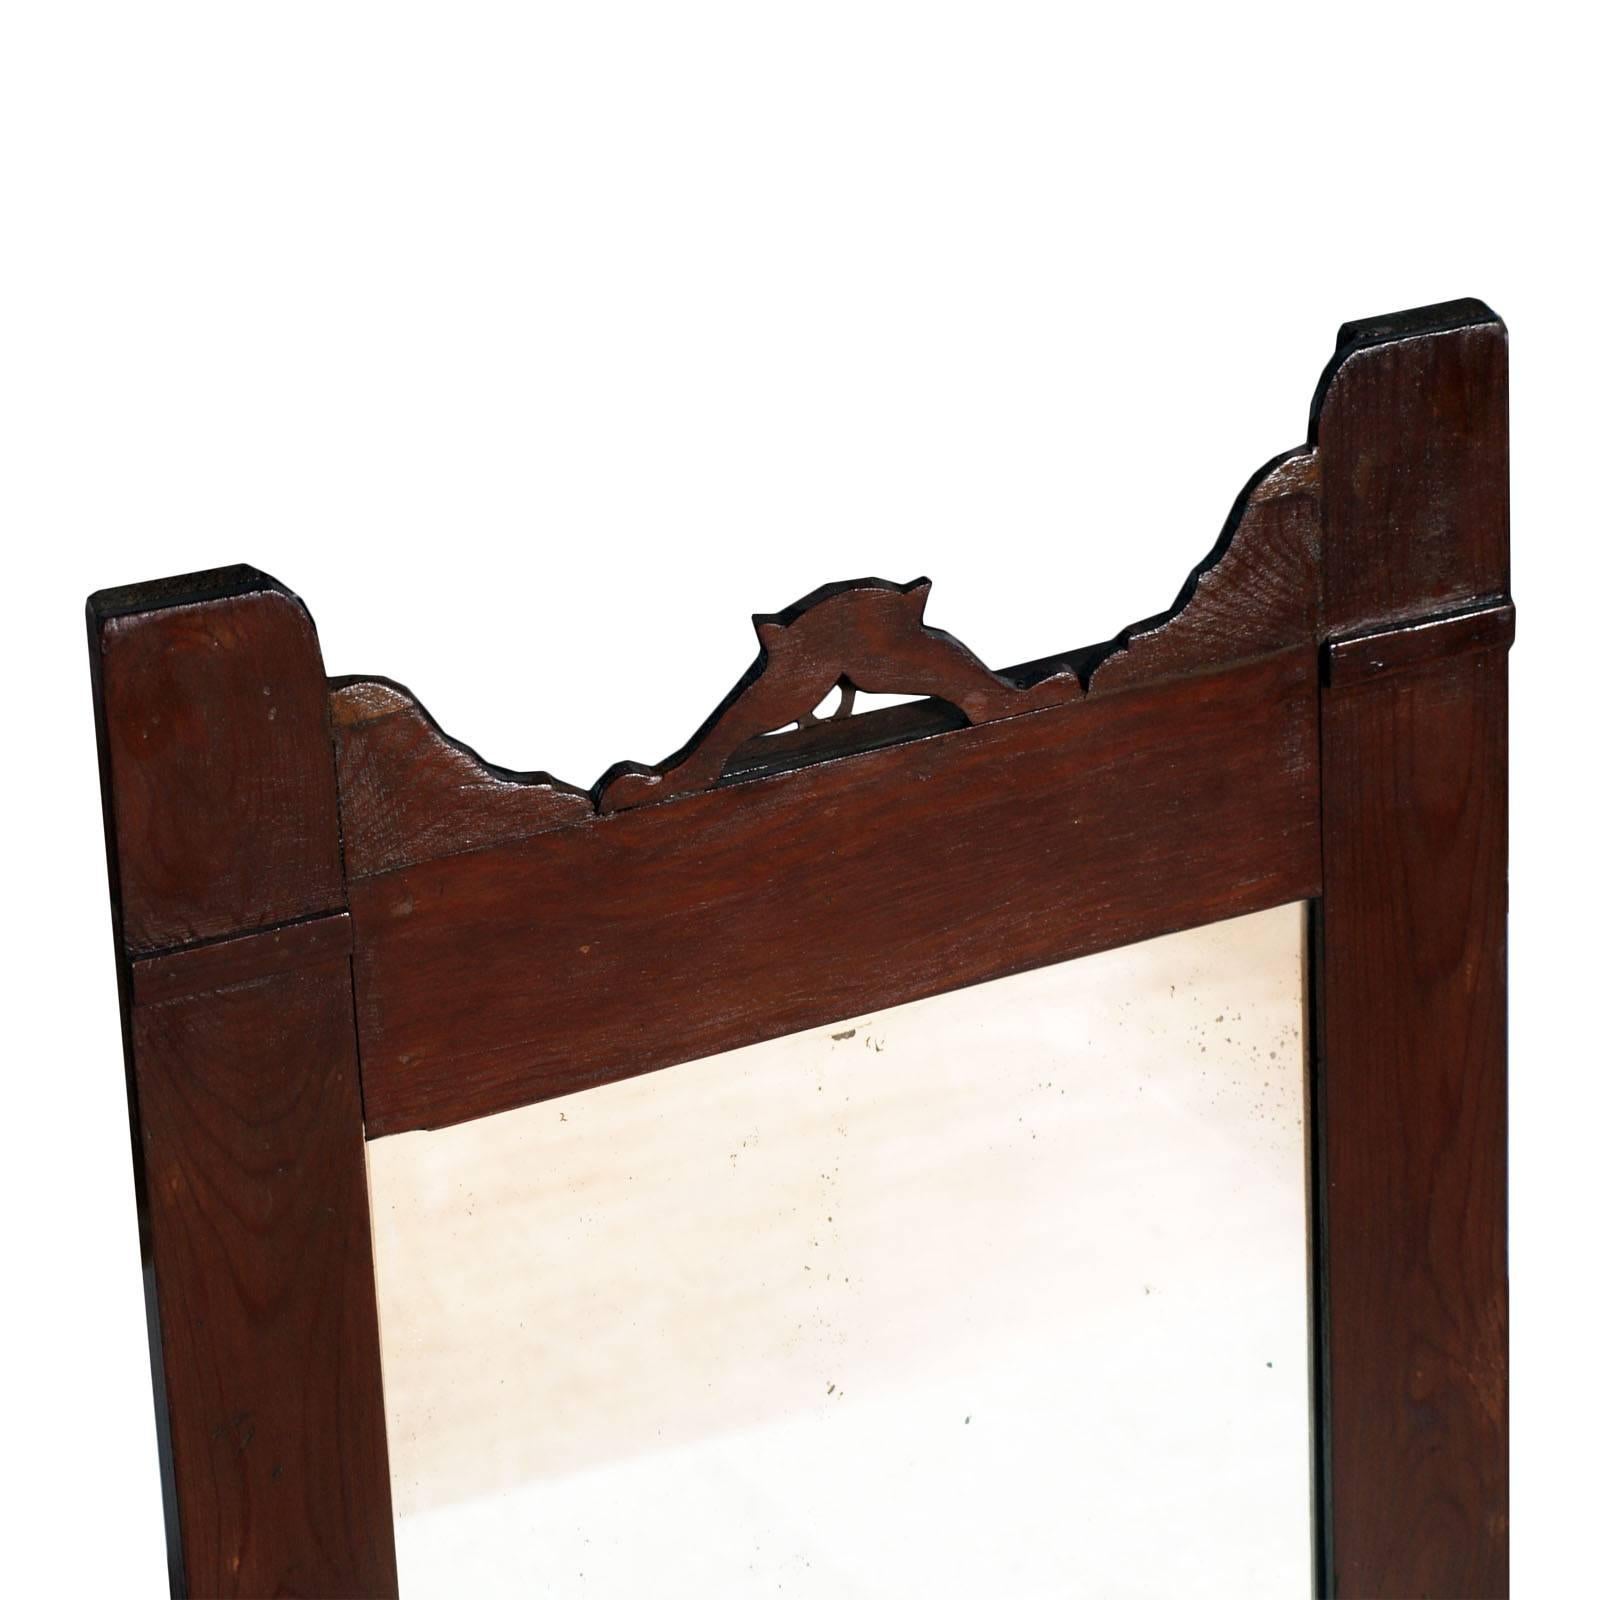 Late 19th century country Art Nouveau mirror in walnut, restored and finished to wax

Measure cm: H 70, W 45, D 4.